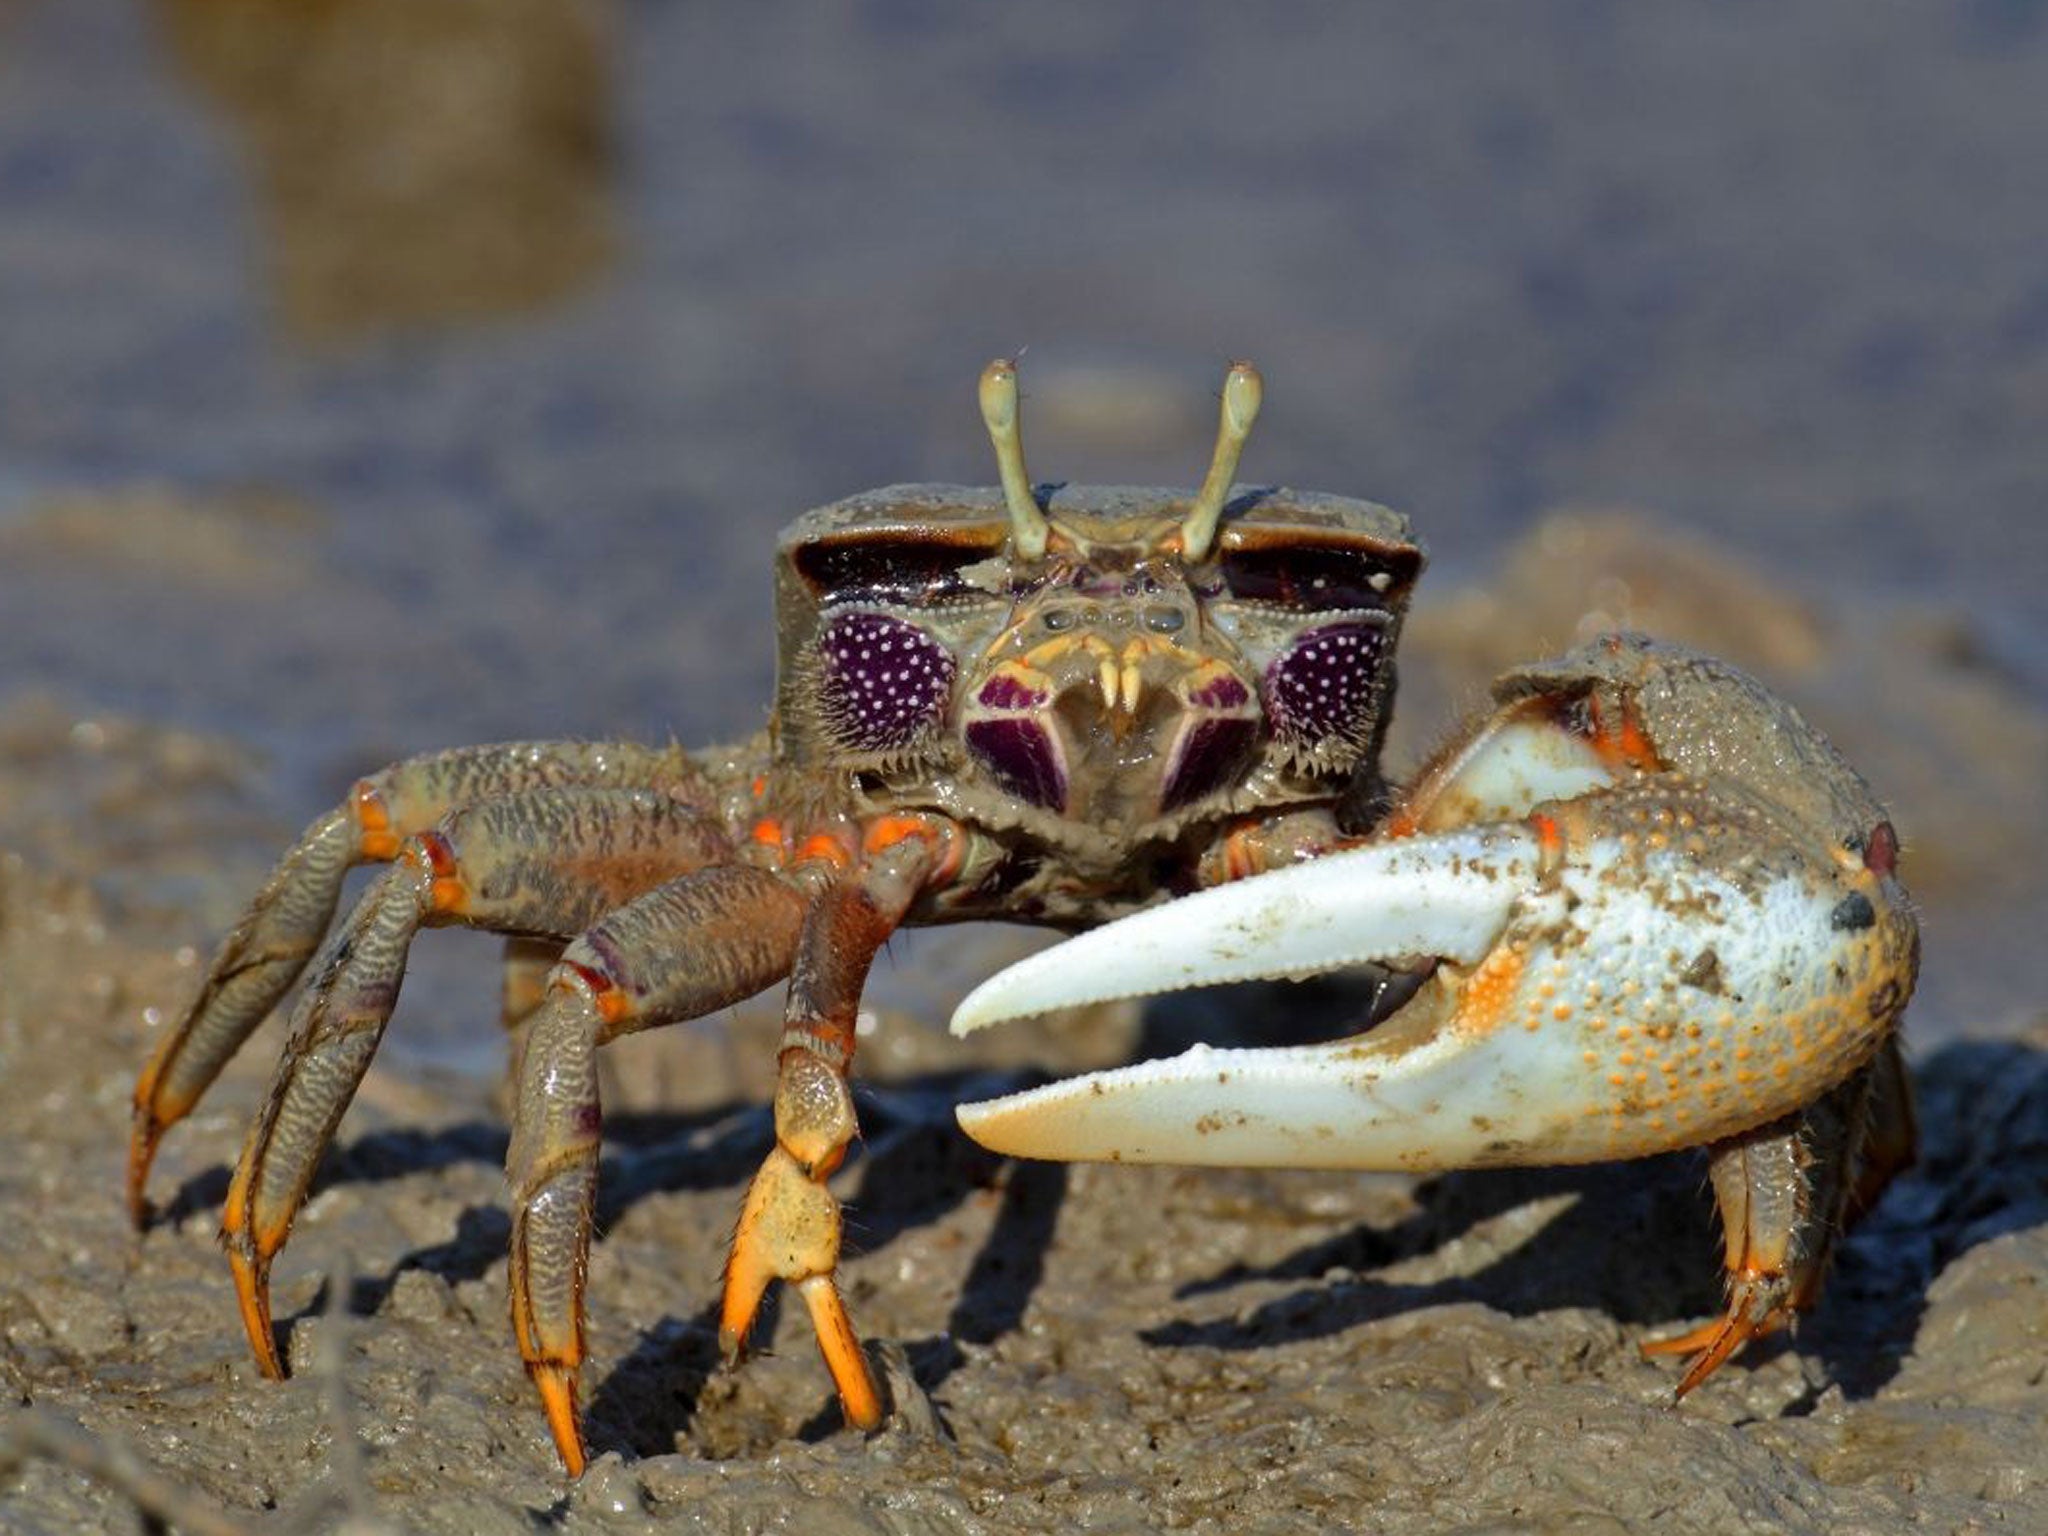 Fiddler crabs: During mating displays, the males stand beside other males who have smaller claws to make their own claws look bigger